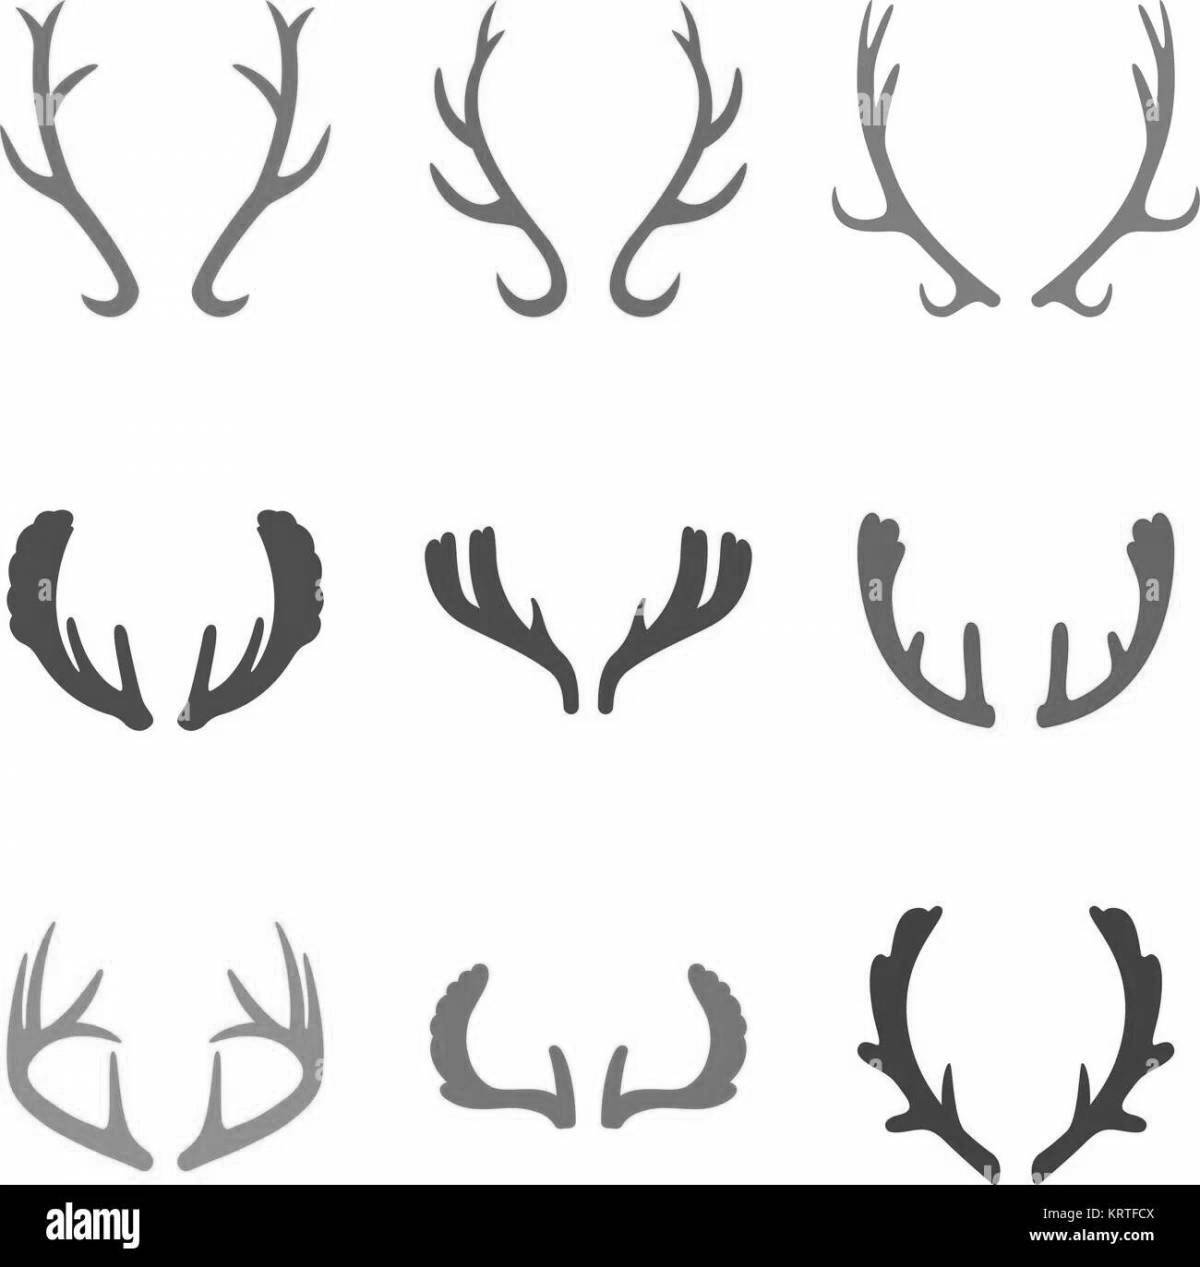 Artistic coloring of antlers